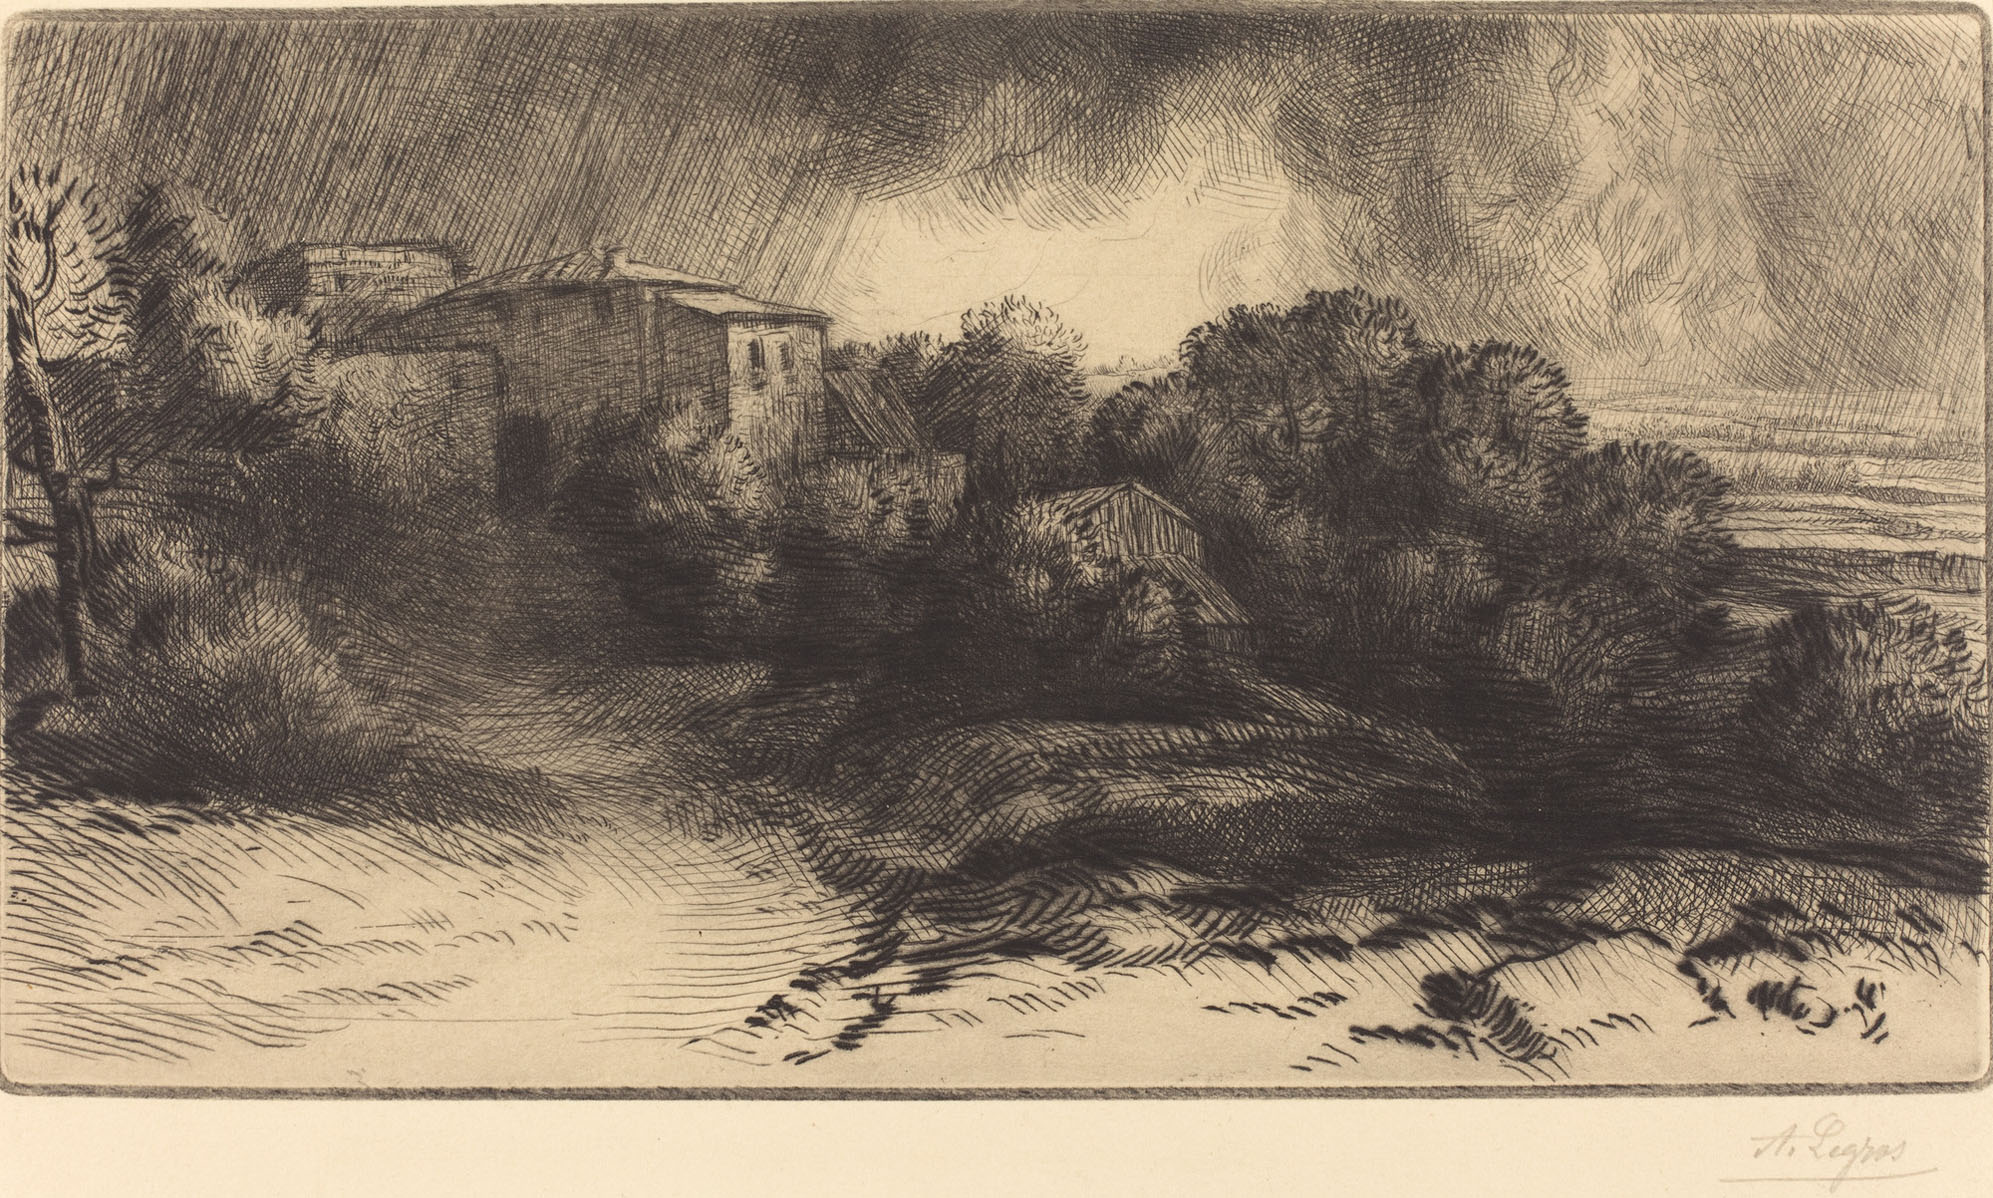 Alphonse Legros, View of a Farm Seen in a Storm (La ferme de Brieux (Effet d\'orage)), French, 1837 - 1911, , drypoint and (etching?), Gift of George Matthew Adams in memory of his mother, Lydia Havens Adams